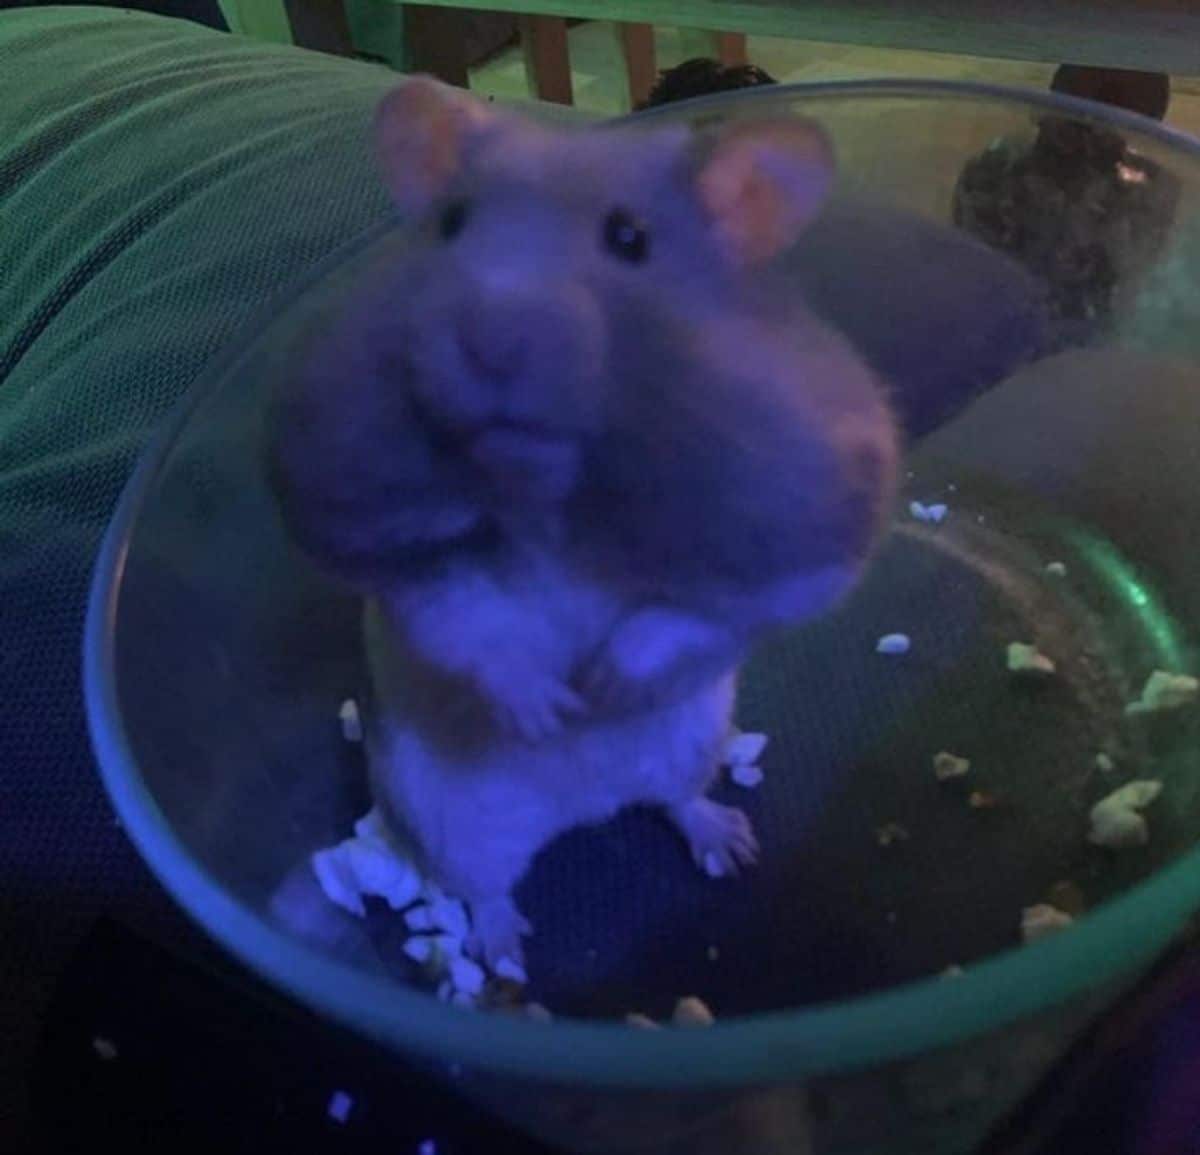 hamster standing on hind legs in a glass bowl with both cheeks full of food